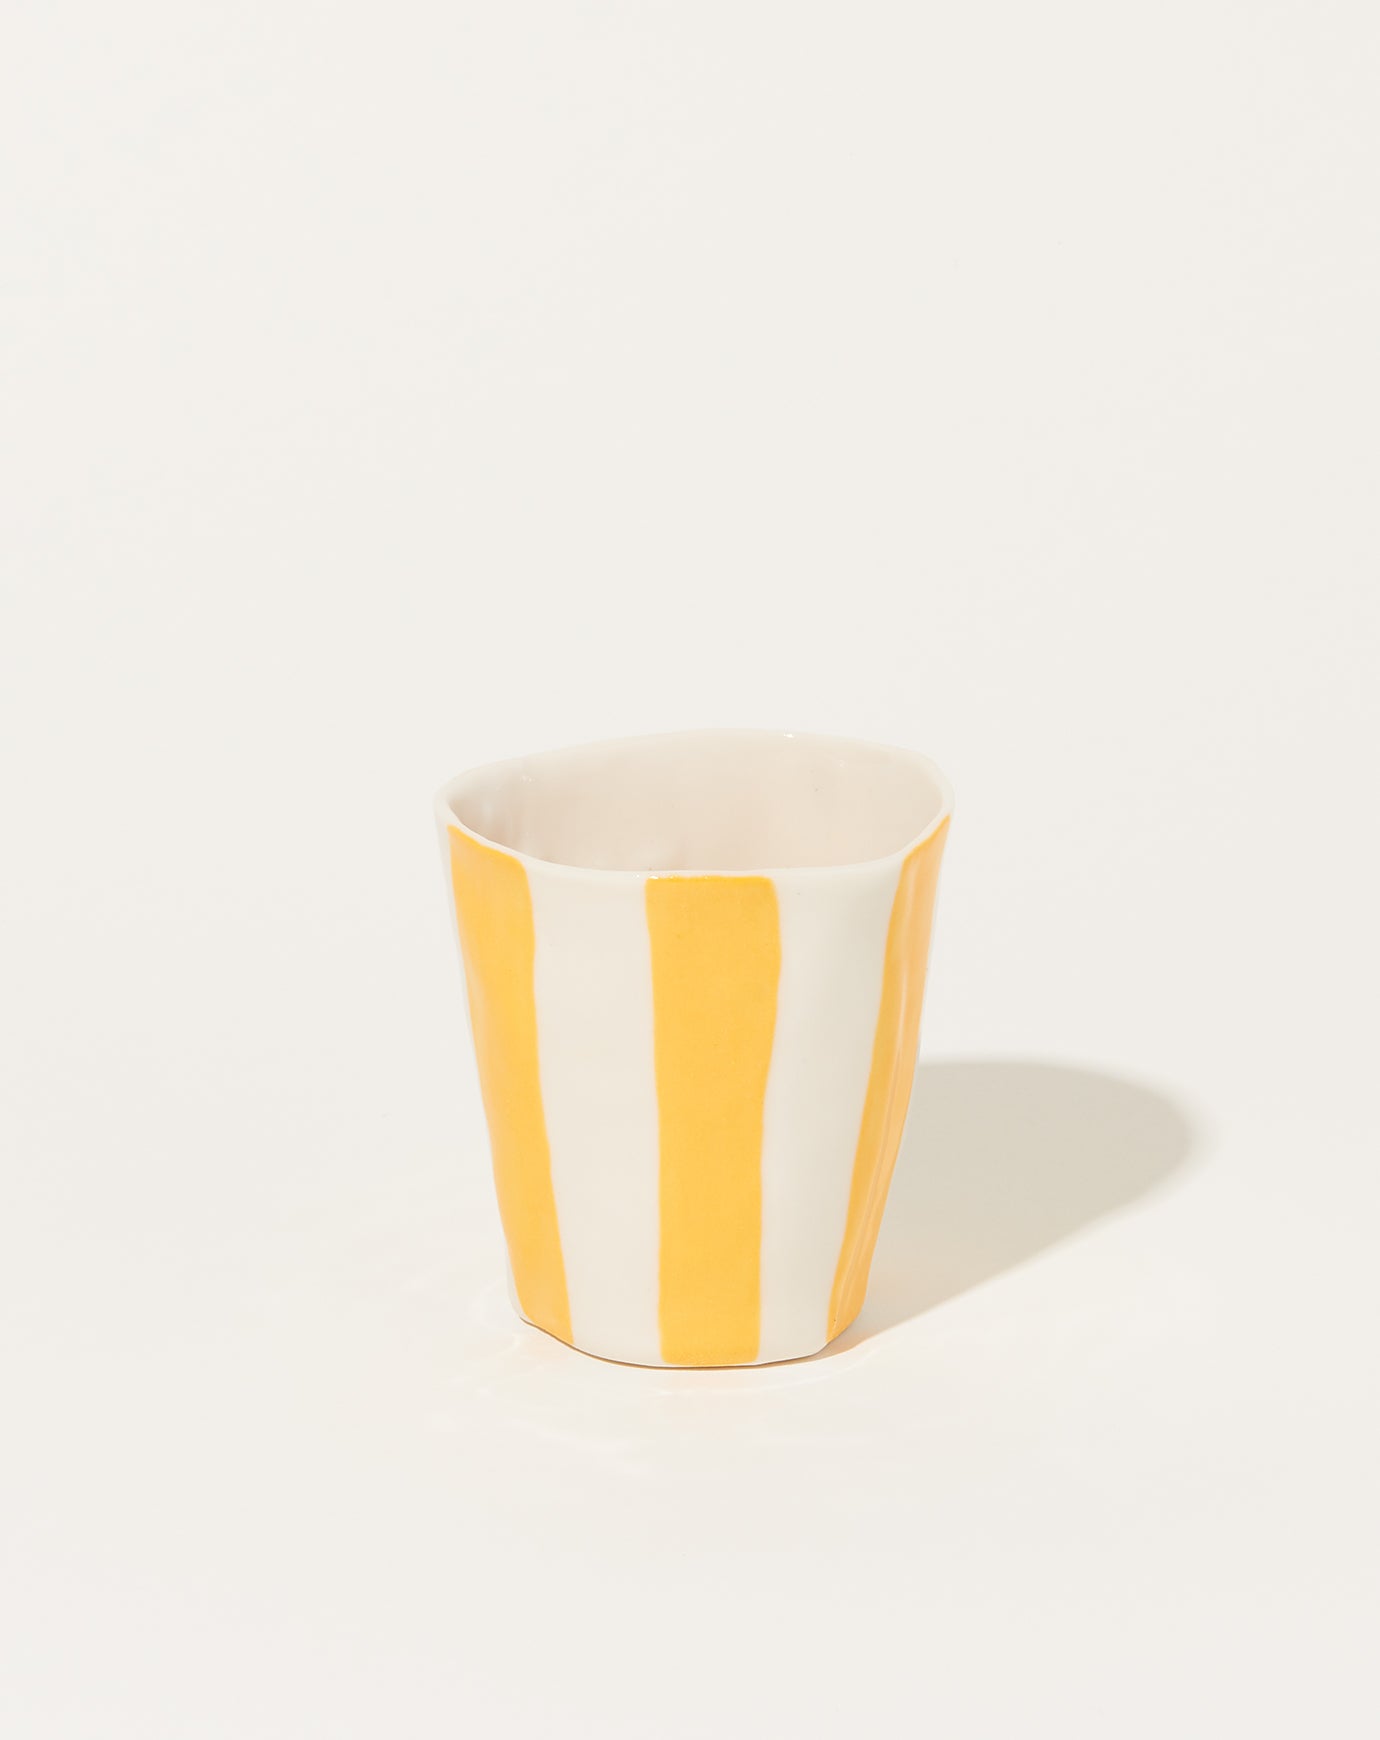 Isabel Halley Wine Cup in Goldenrod